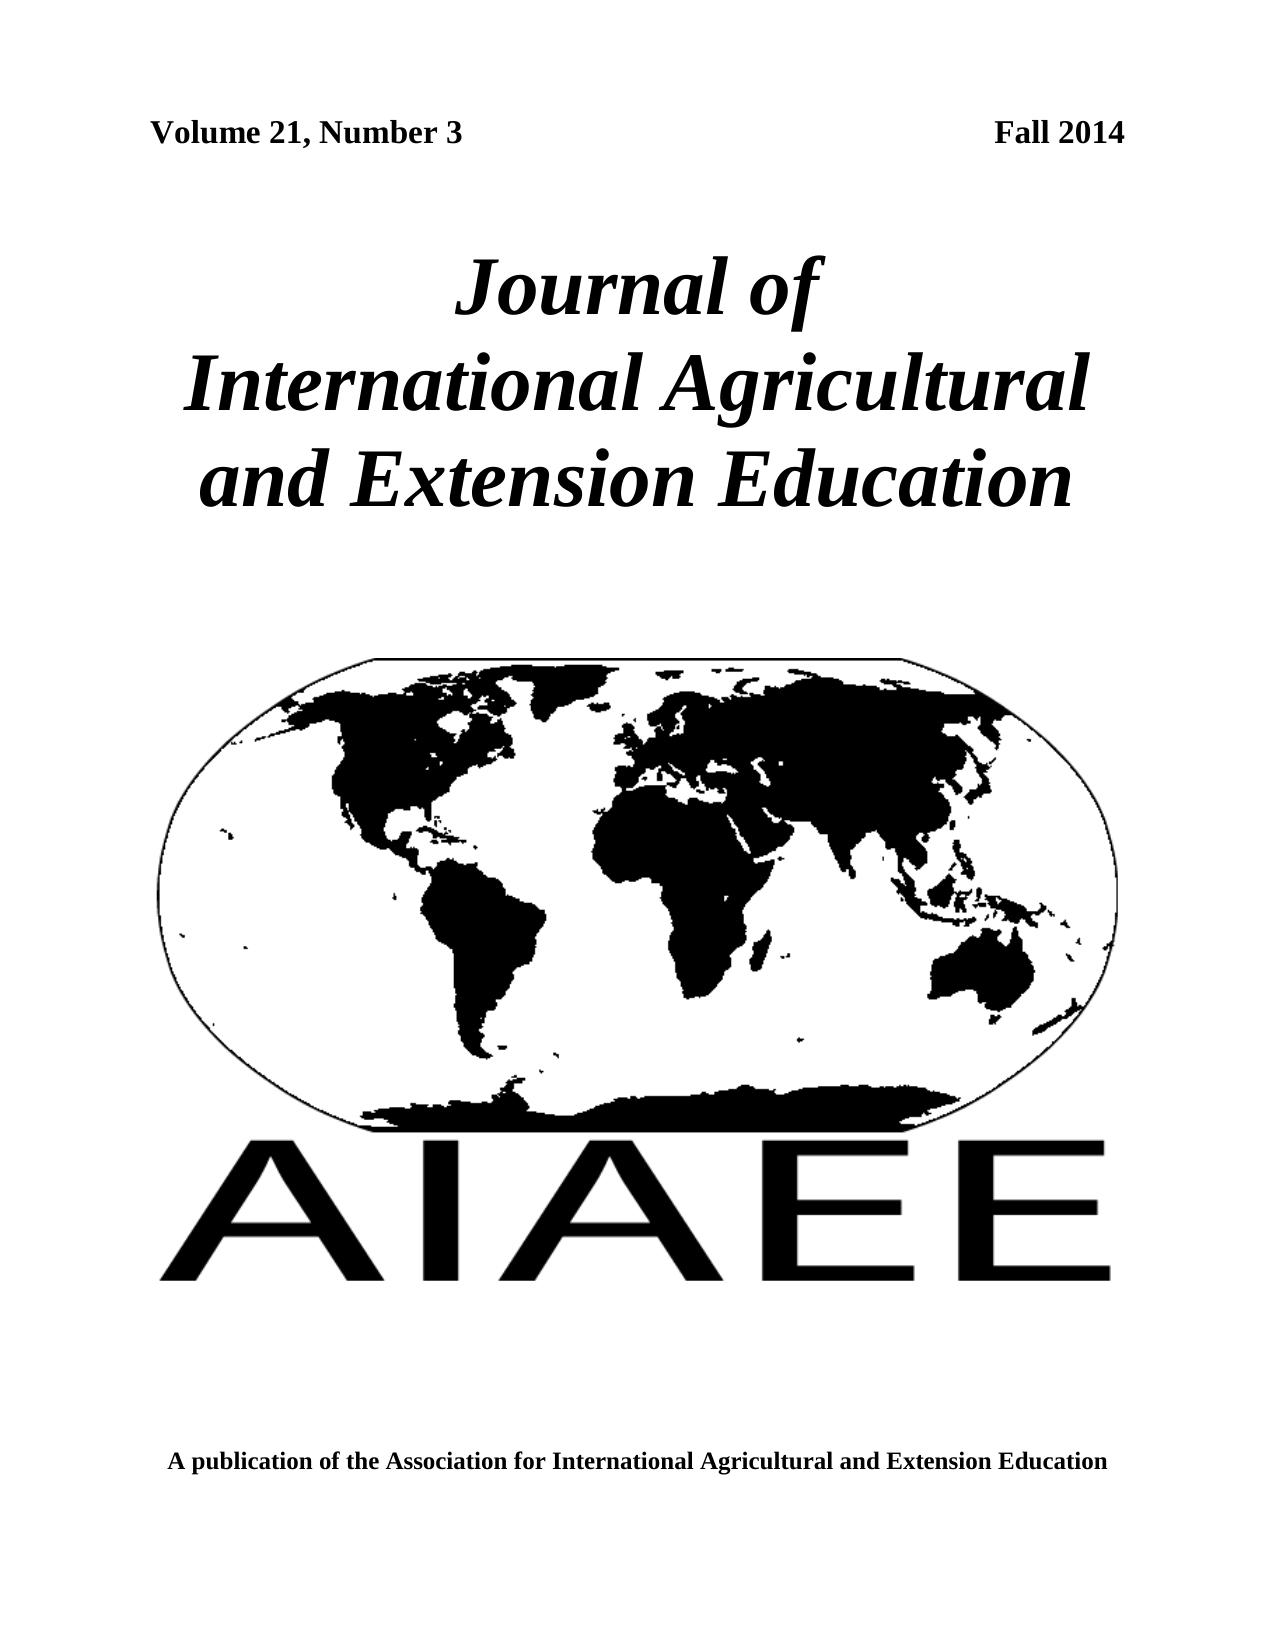 Journal of International Agricultural and Extension Education 2014